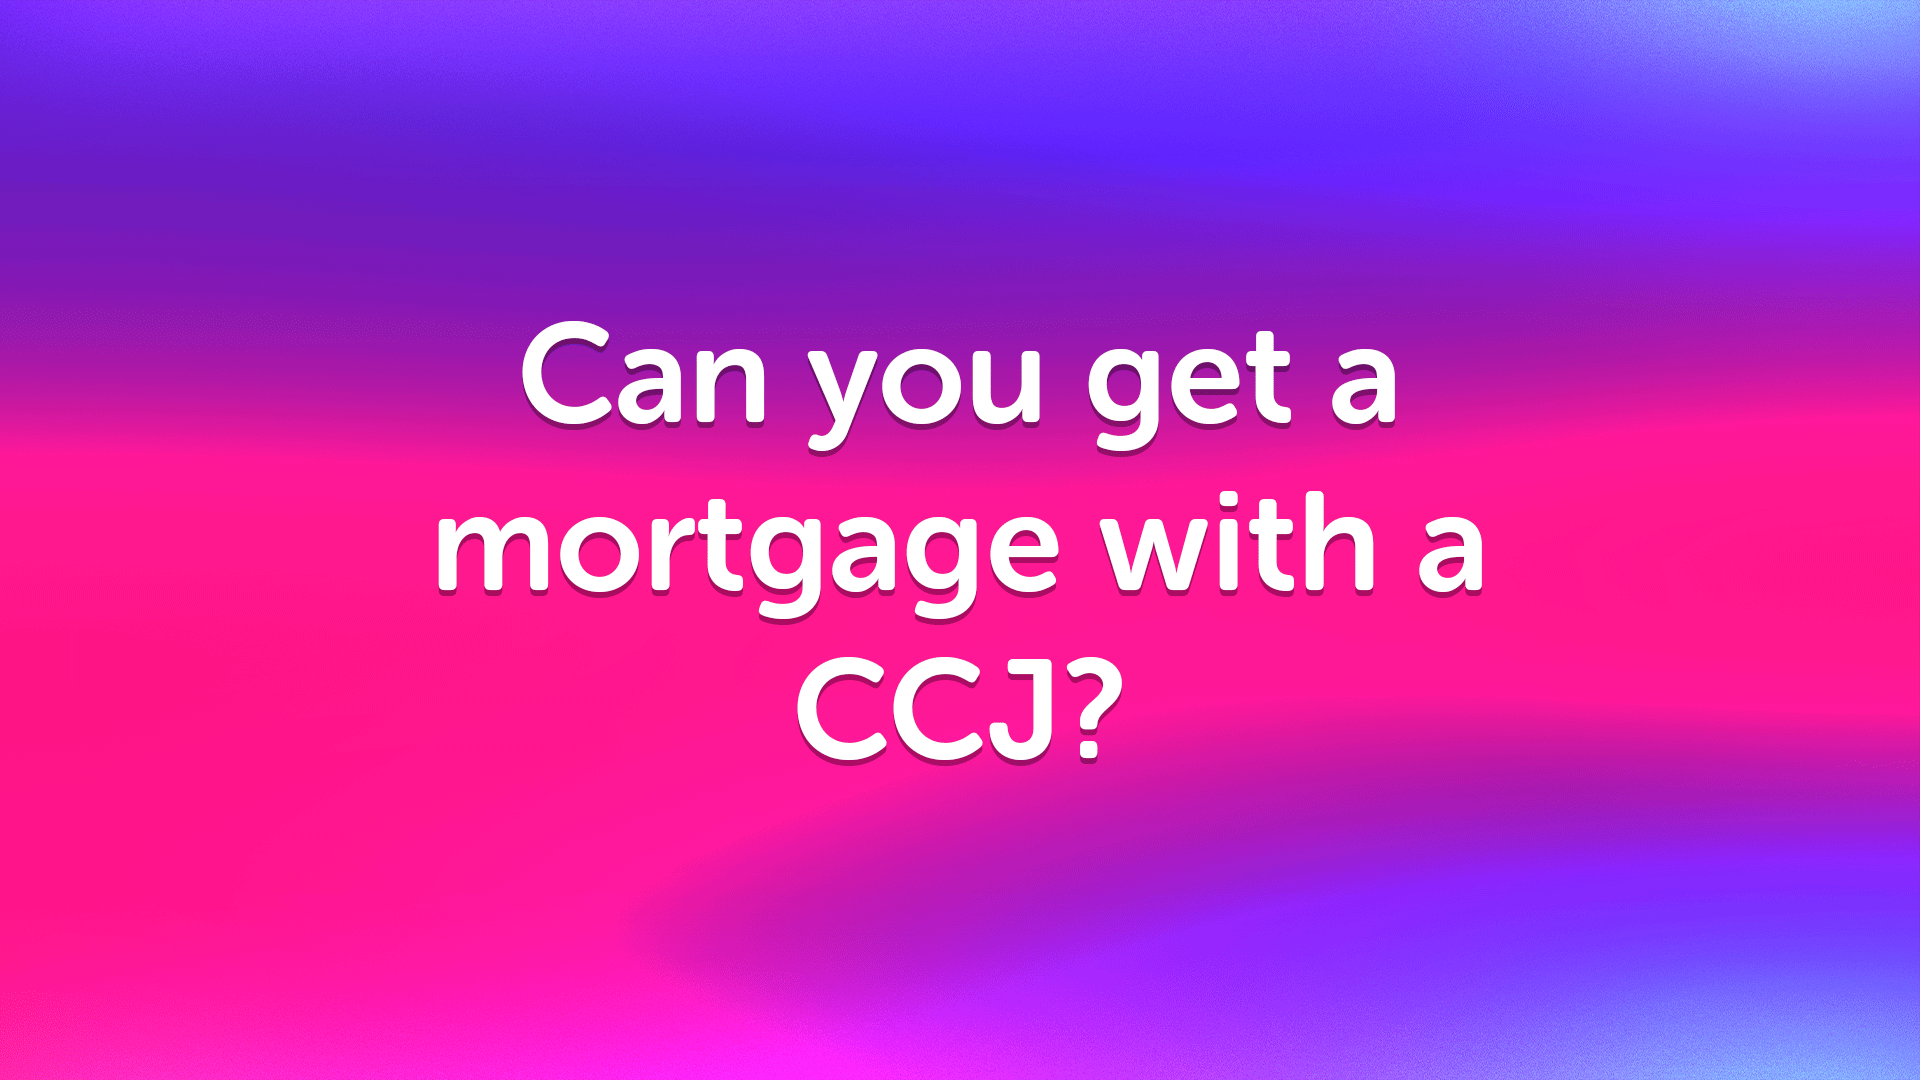 Can You Get a Mortgage in Nottingham With a CCJ?